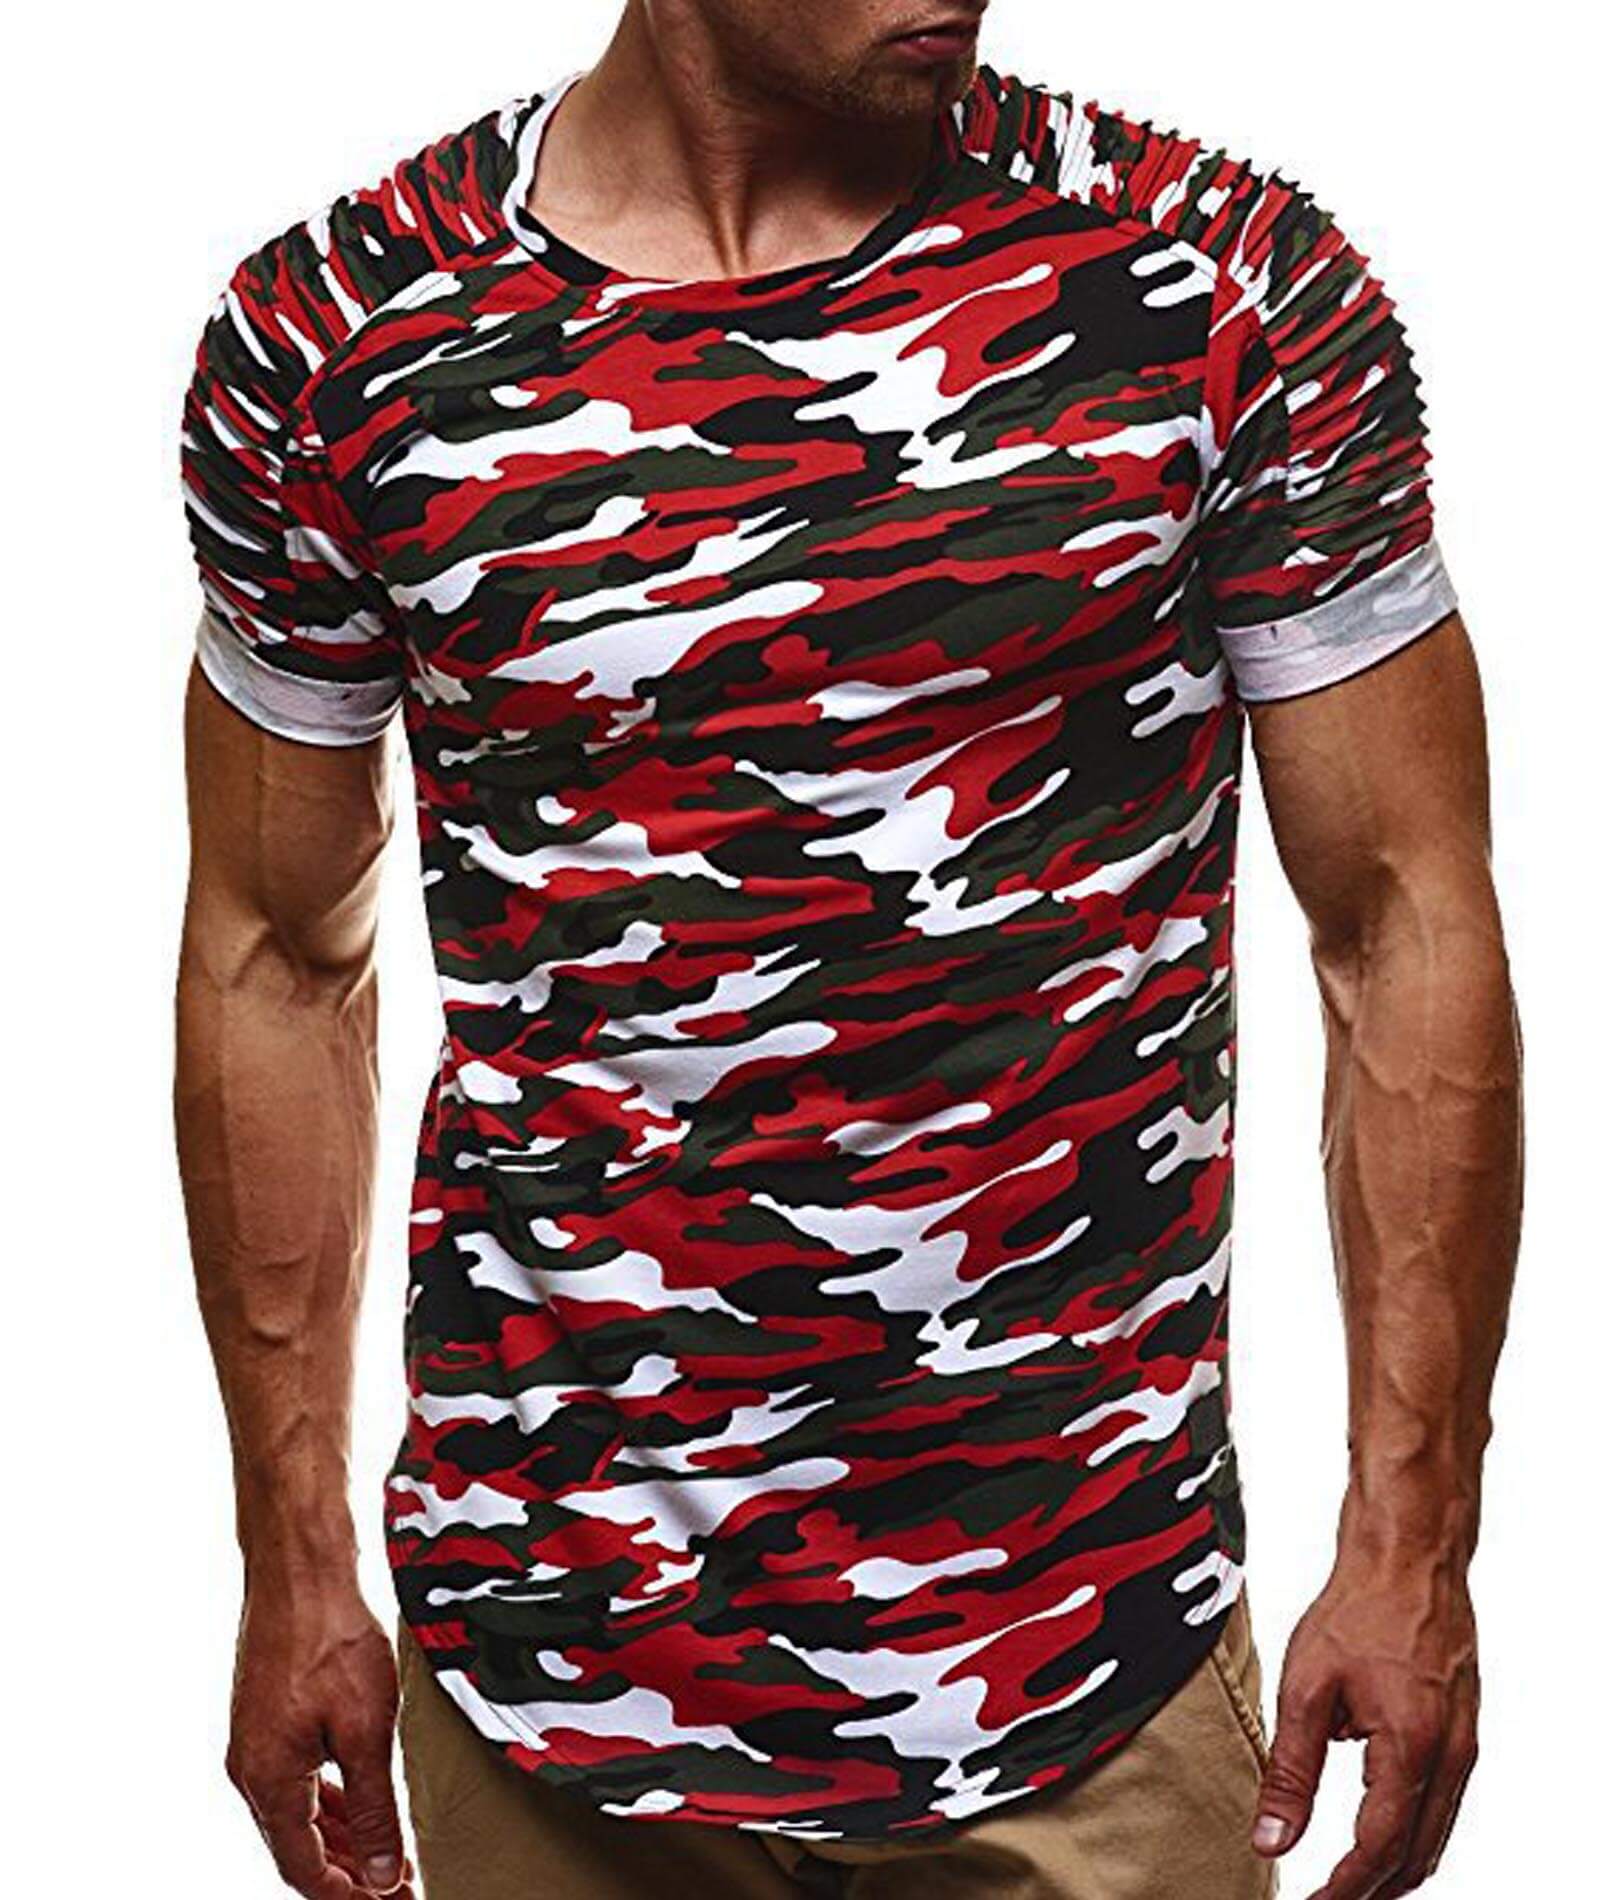  Men's Dry-Fit Crew Neck Camouflage Short Sleeve Moisture Wicking Soft Comfy Active T-Shirt